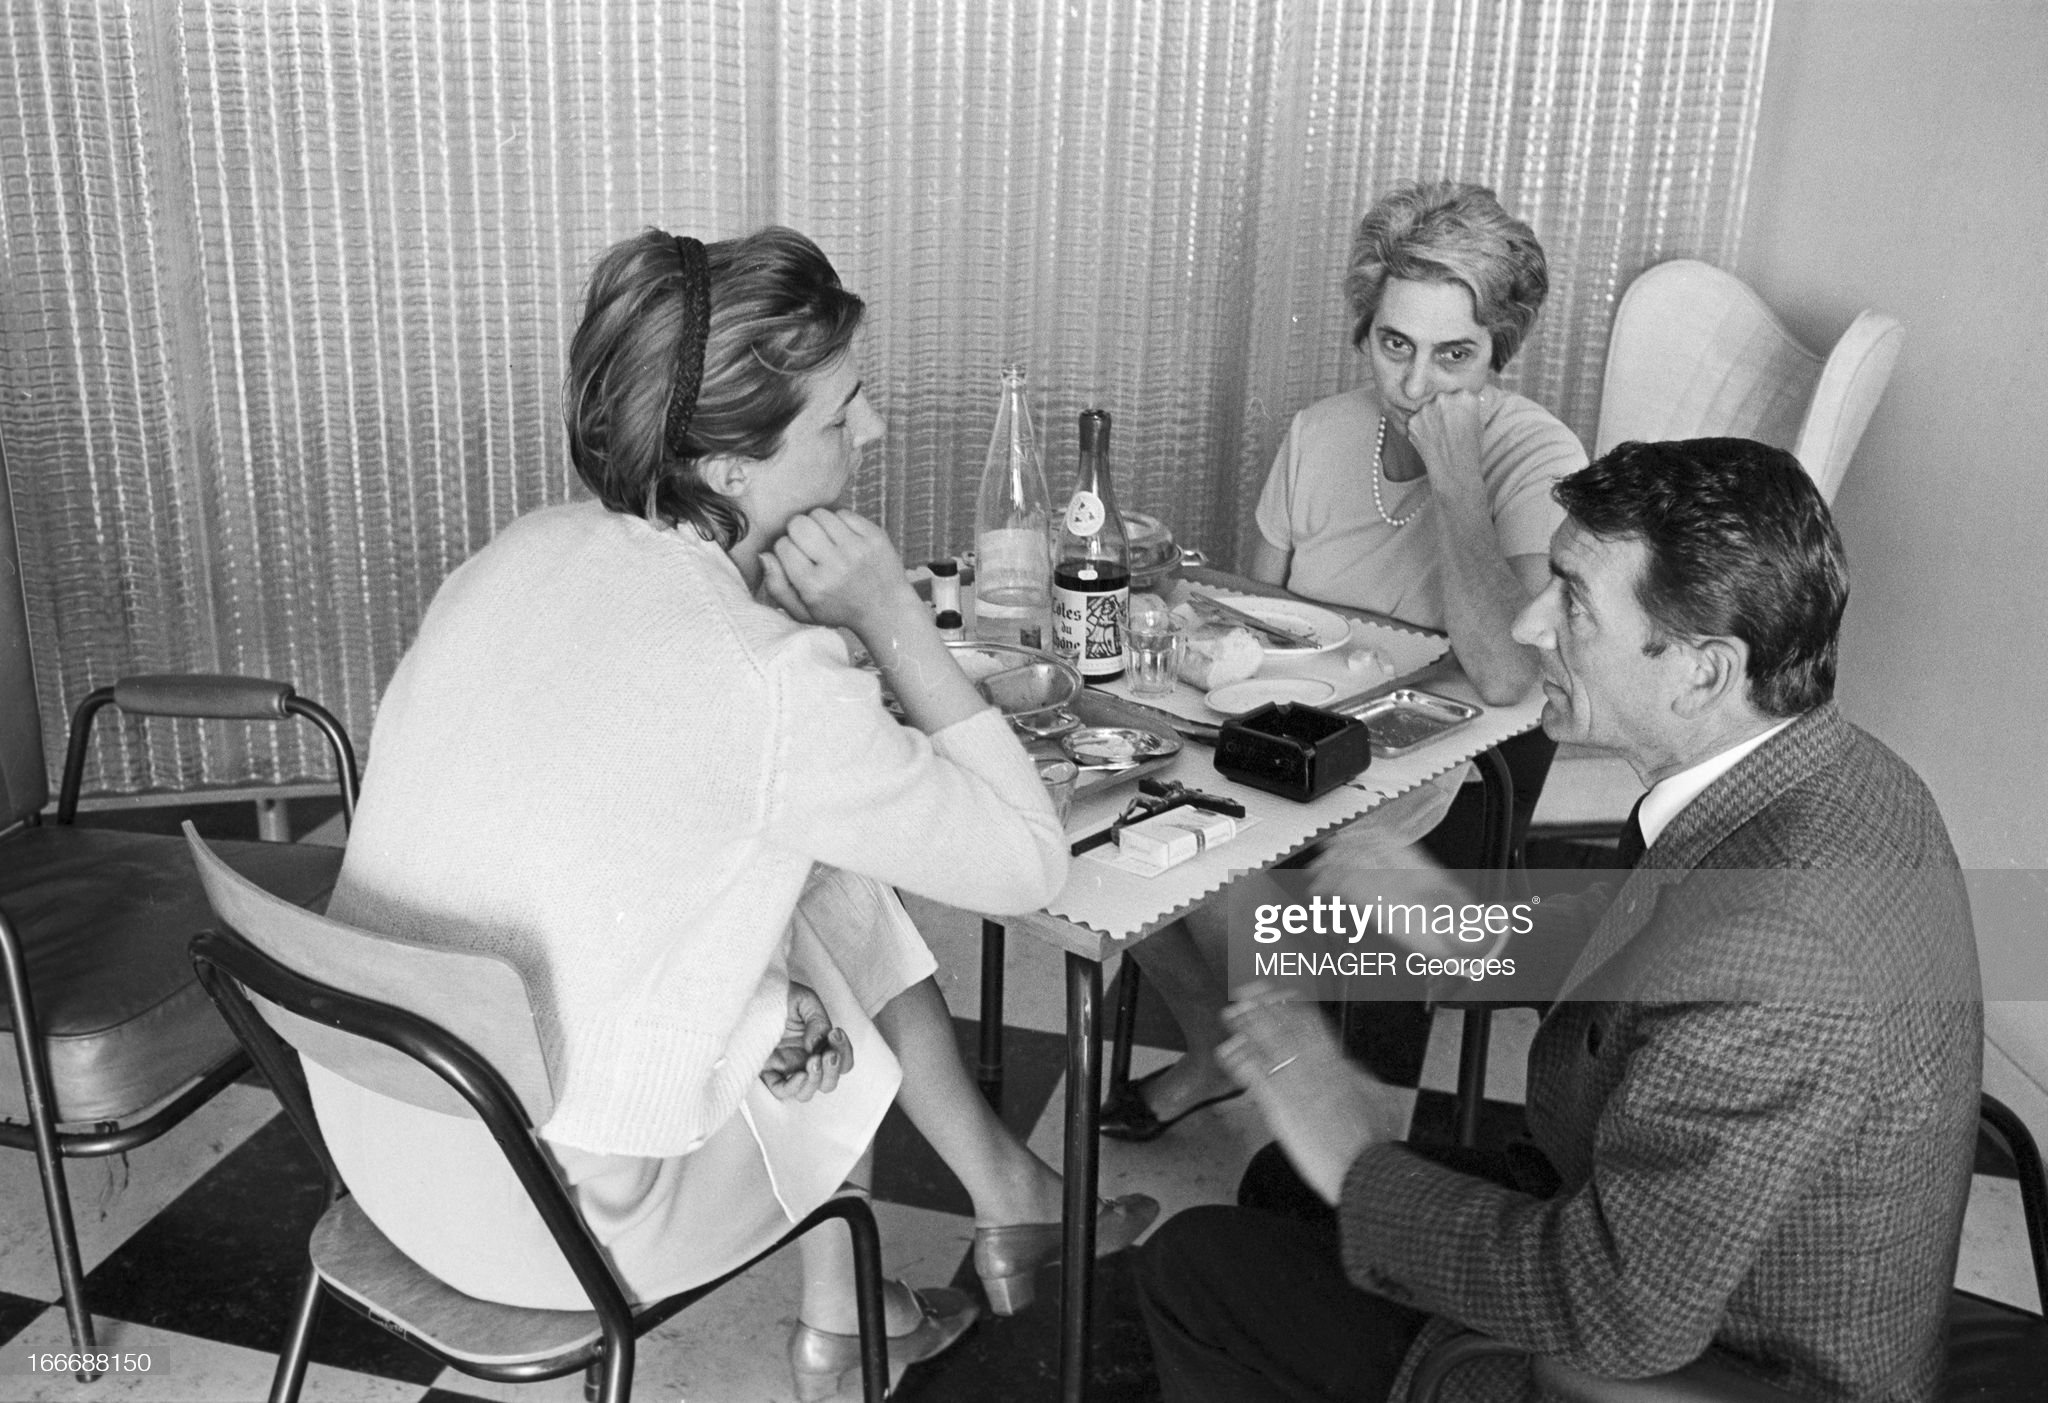 In May 1967, during the Monaco Grand Prix, the Italian driver Lorenzo Bandini, in a Ferrari 321, had an accident in the Principality and was transported to the Princess Grace Hospital. His wife Margherita anxiously awaited the doctors' verdict. 